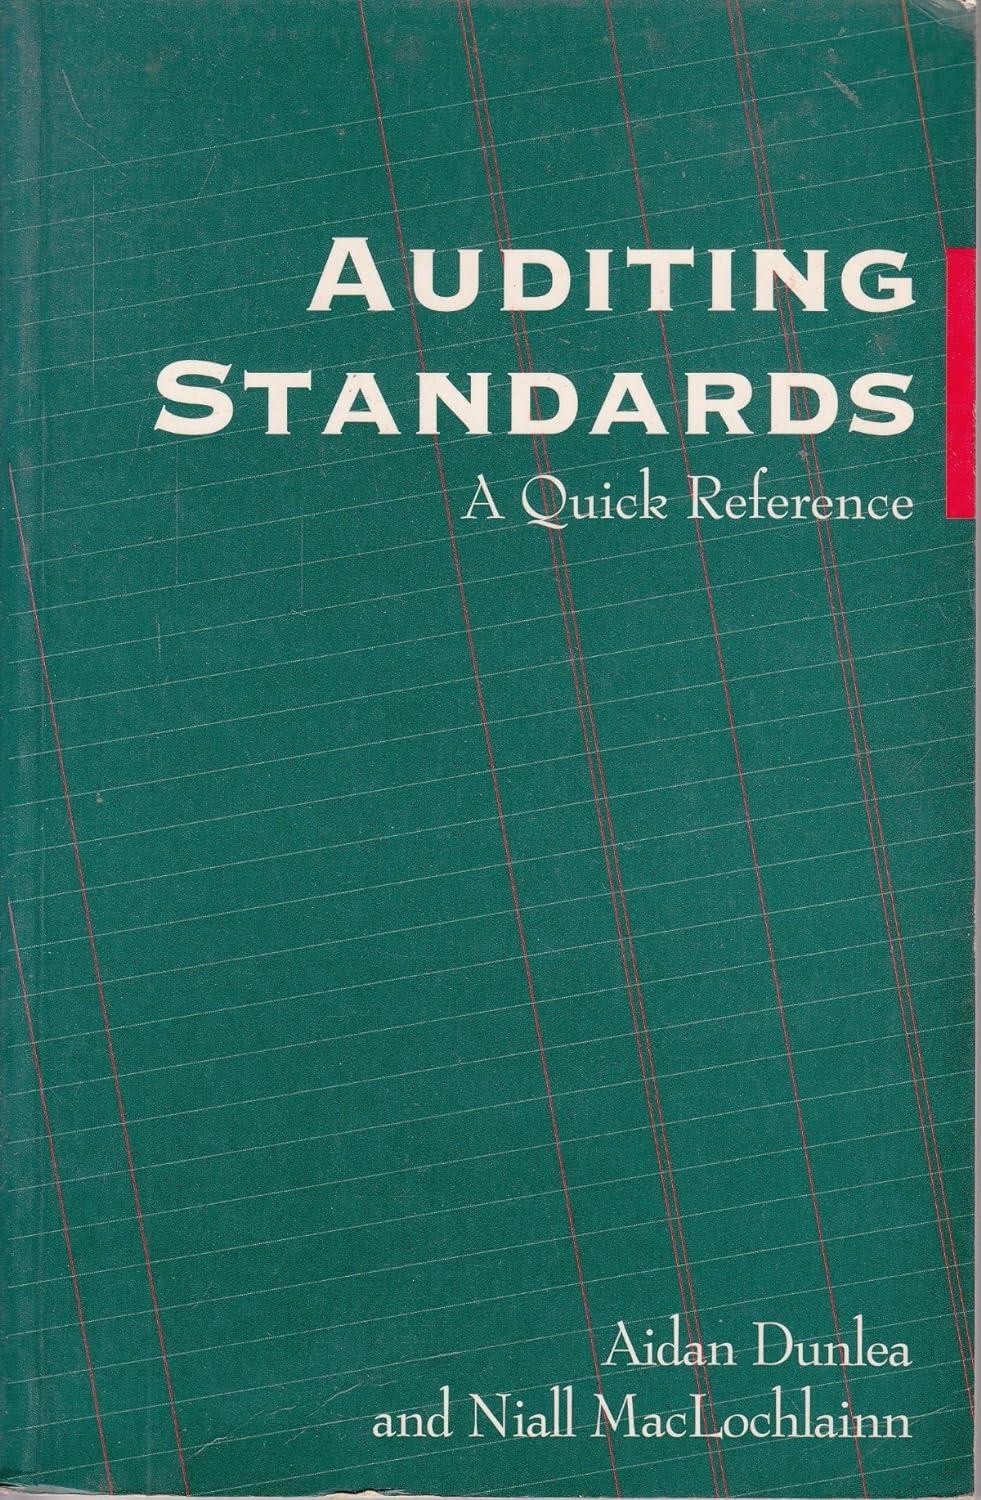 Auditing Standards A Quick Reference